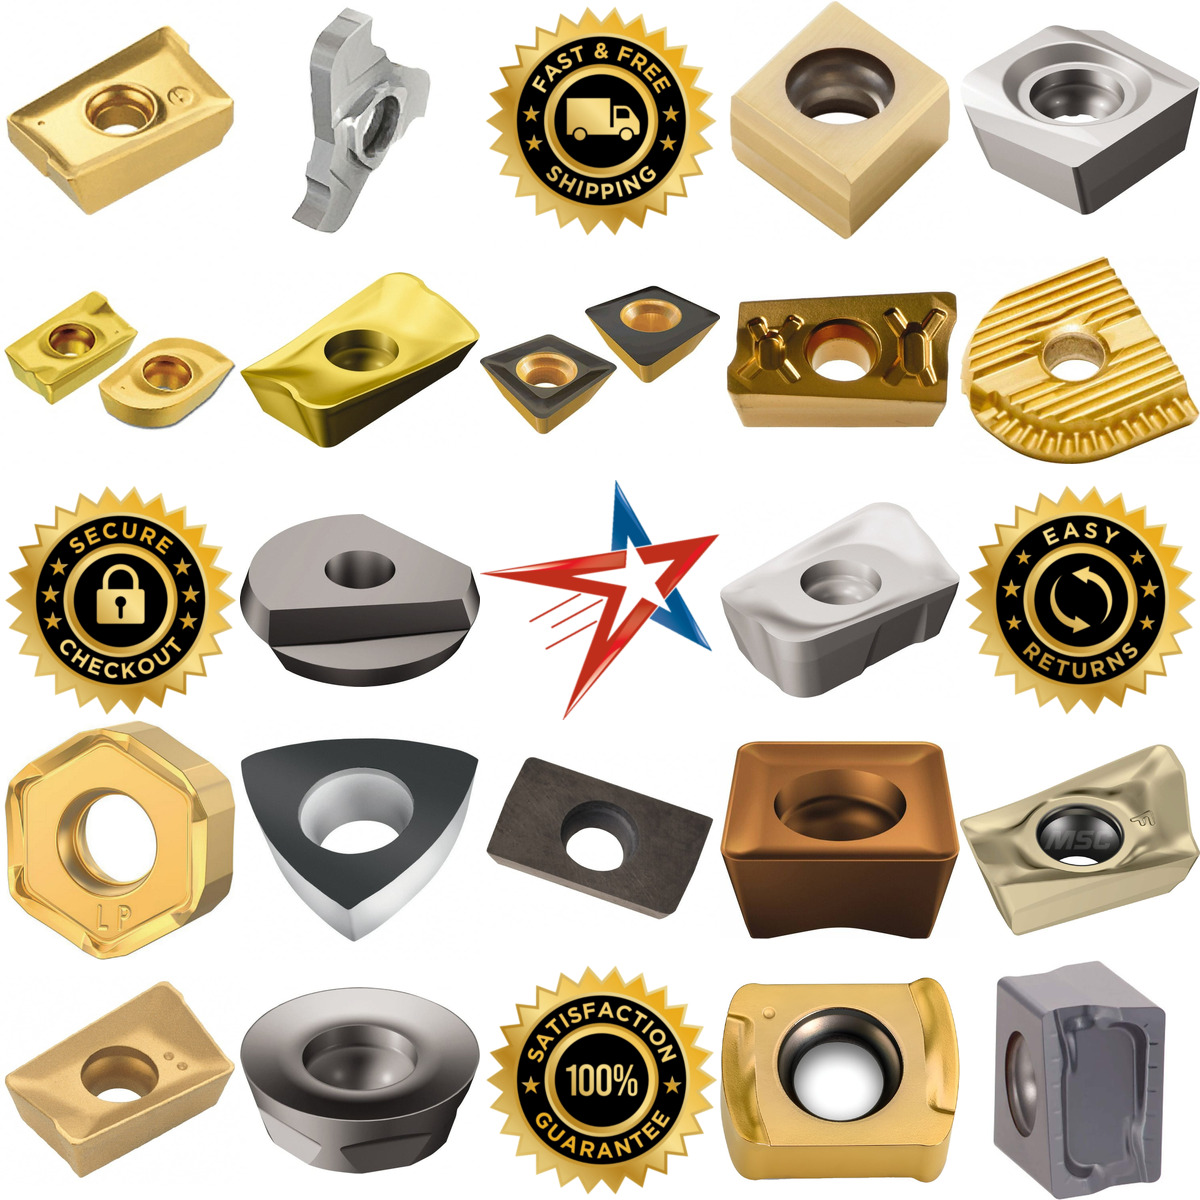 A selection of Milling Inserts products on GoVets